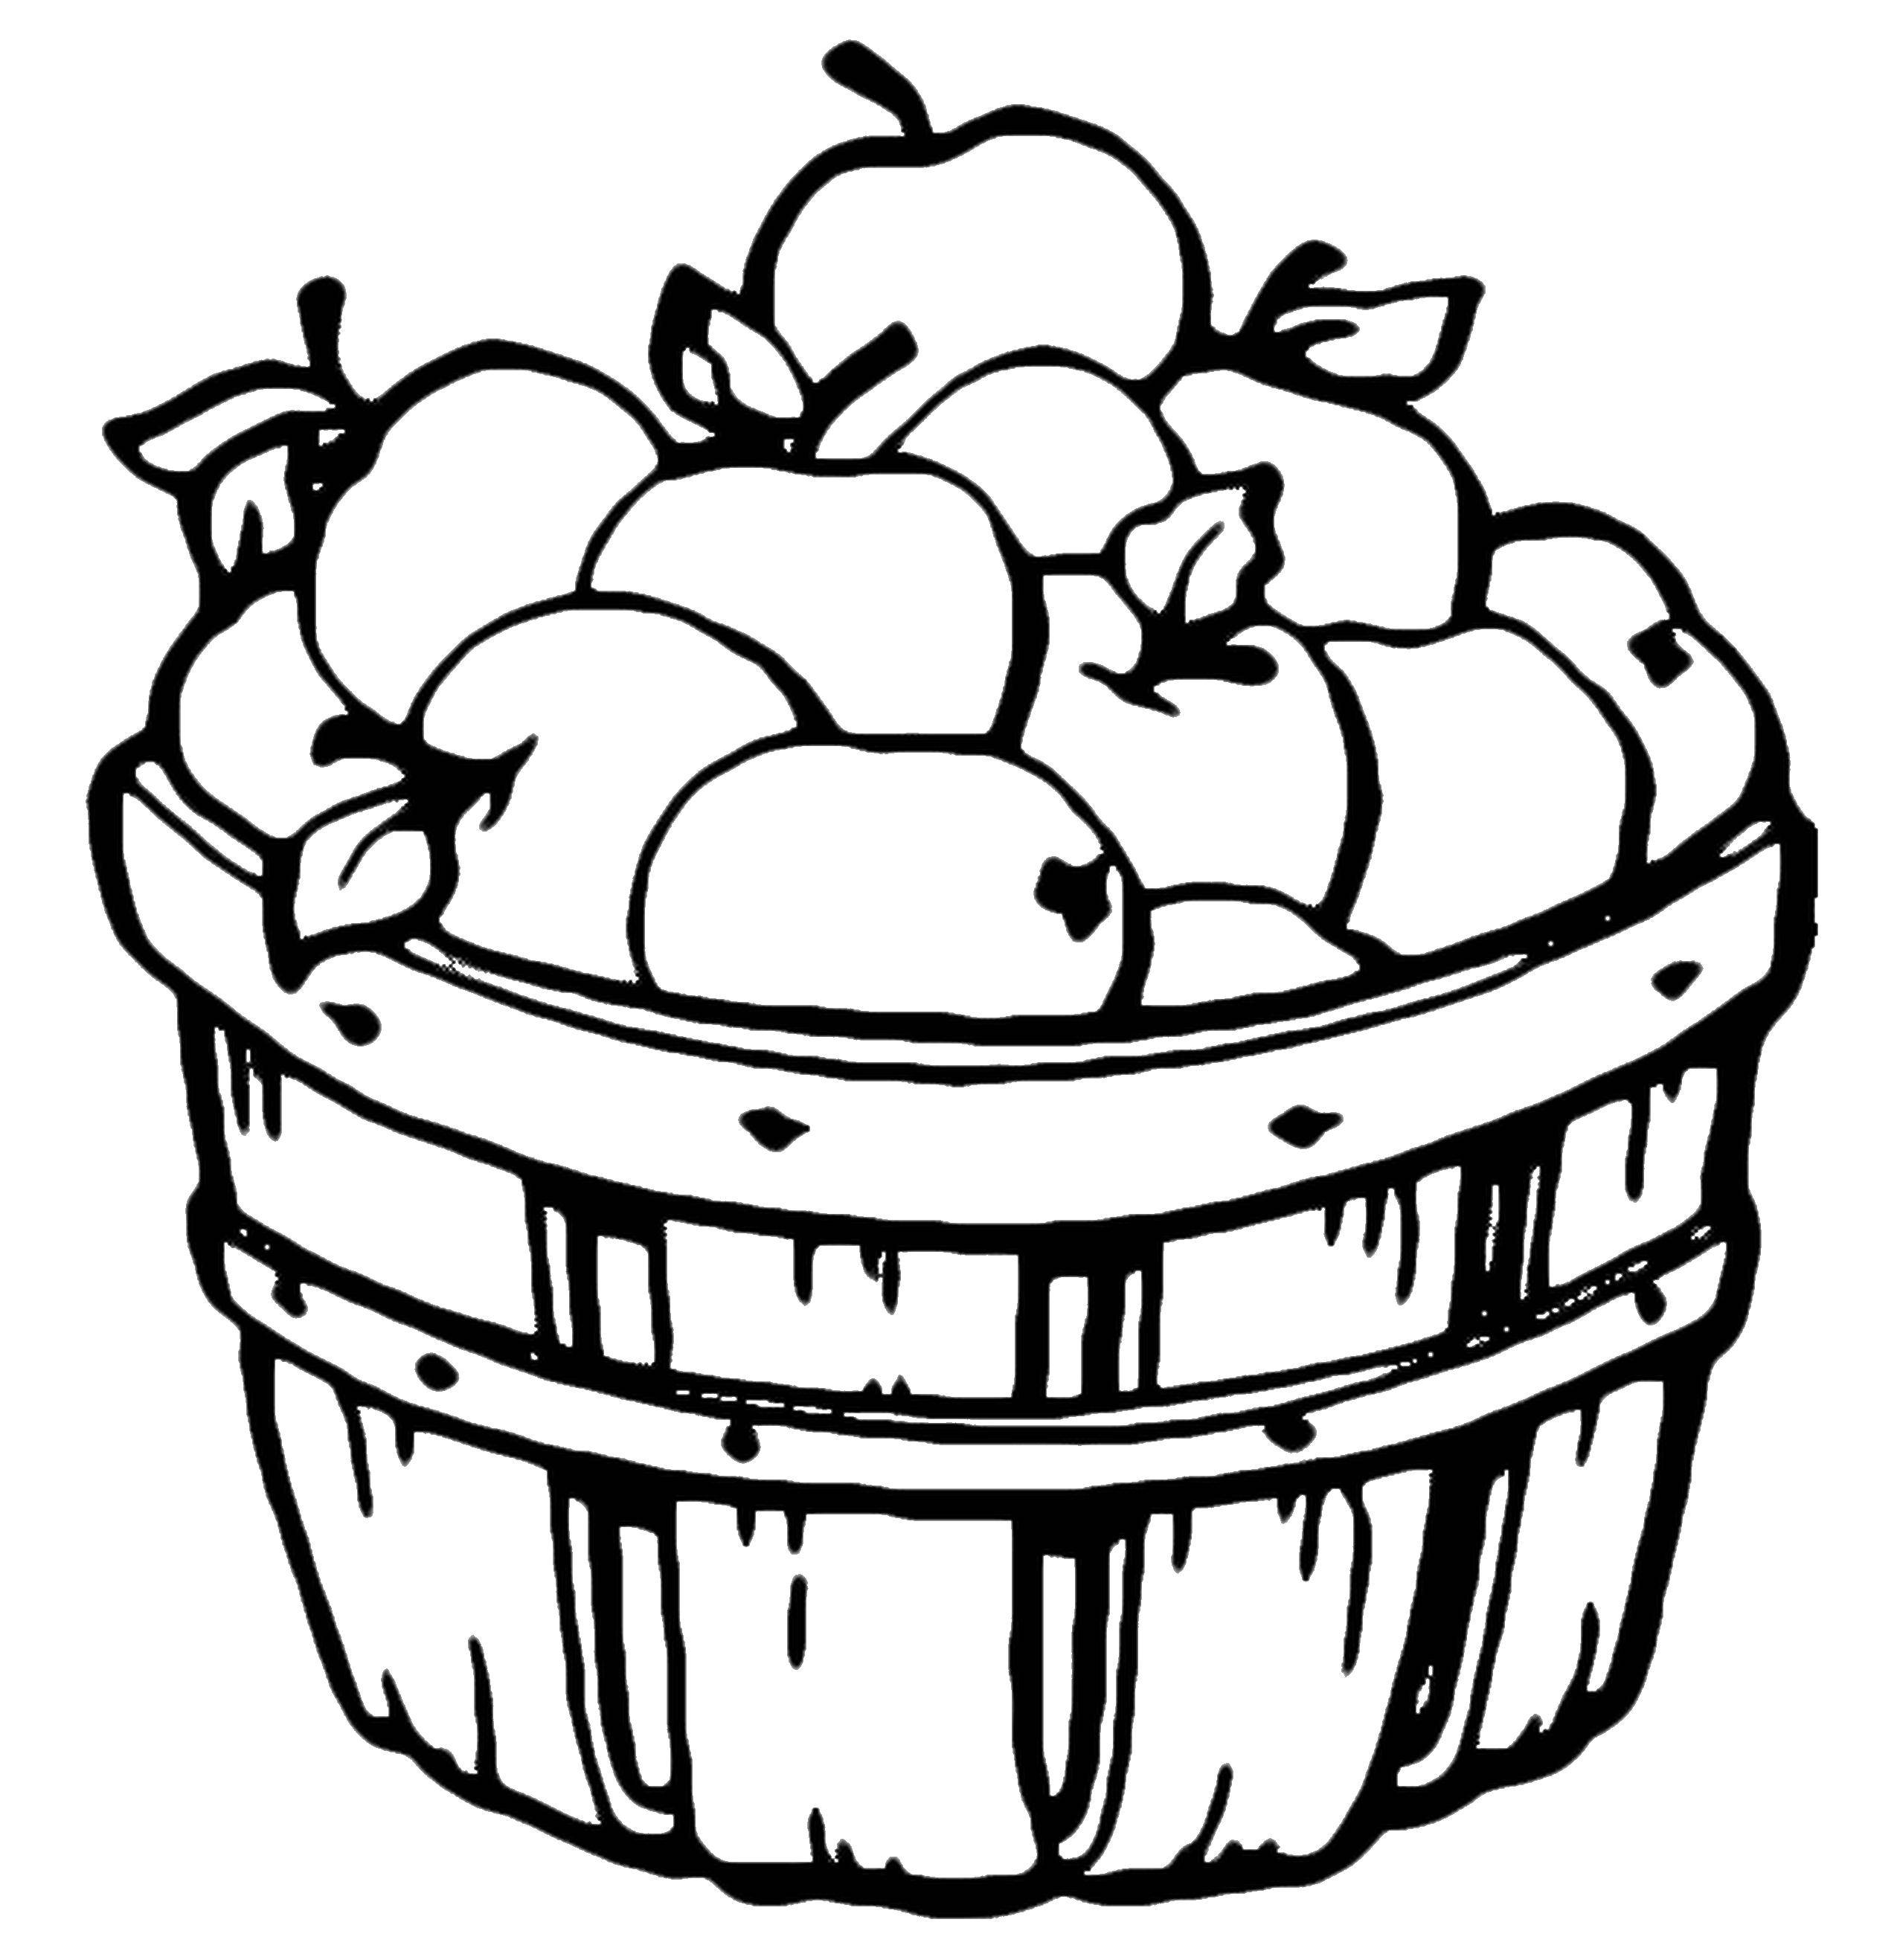 Coloring Basket with apples. Category fruits. Tags:  basket, fruit.